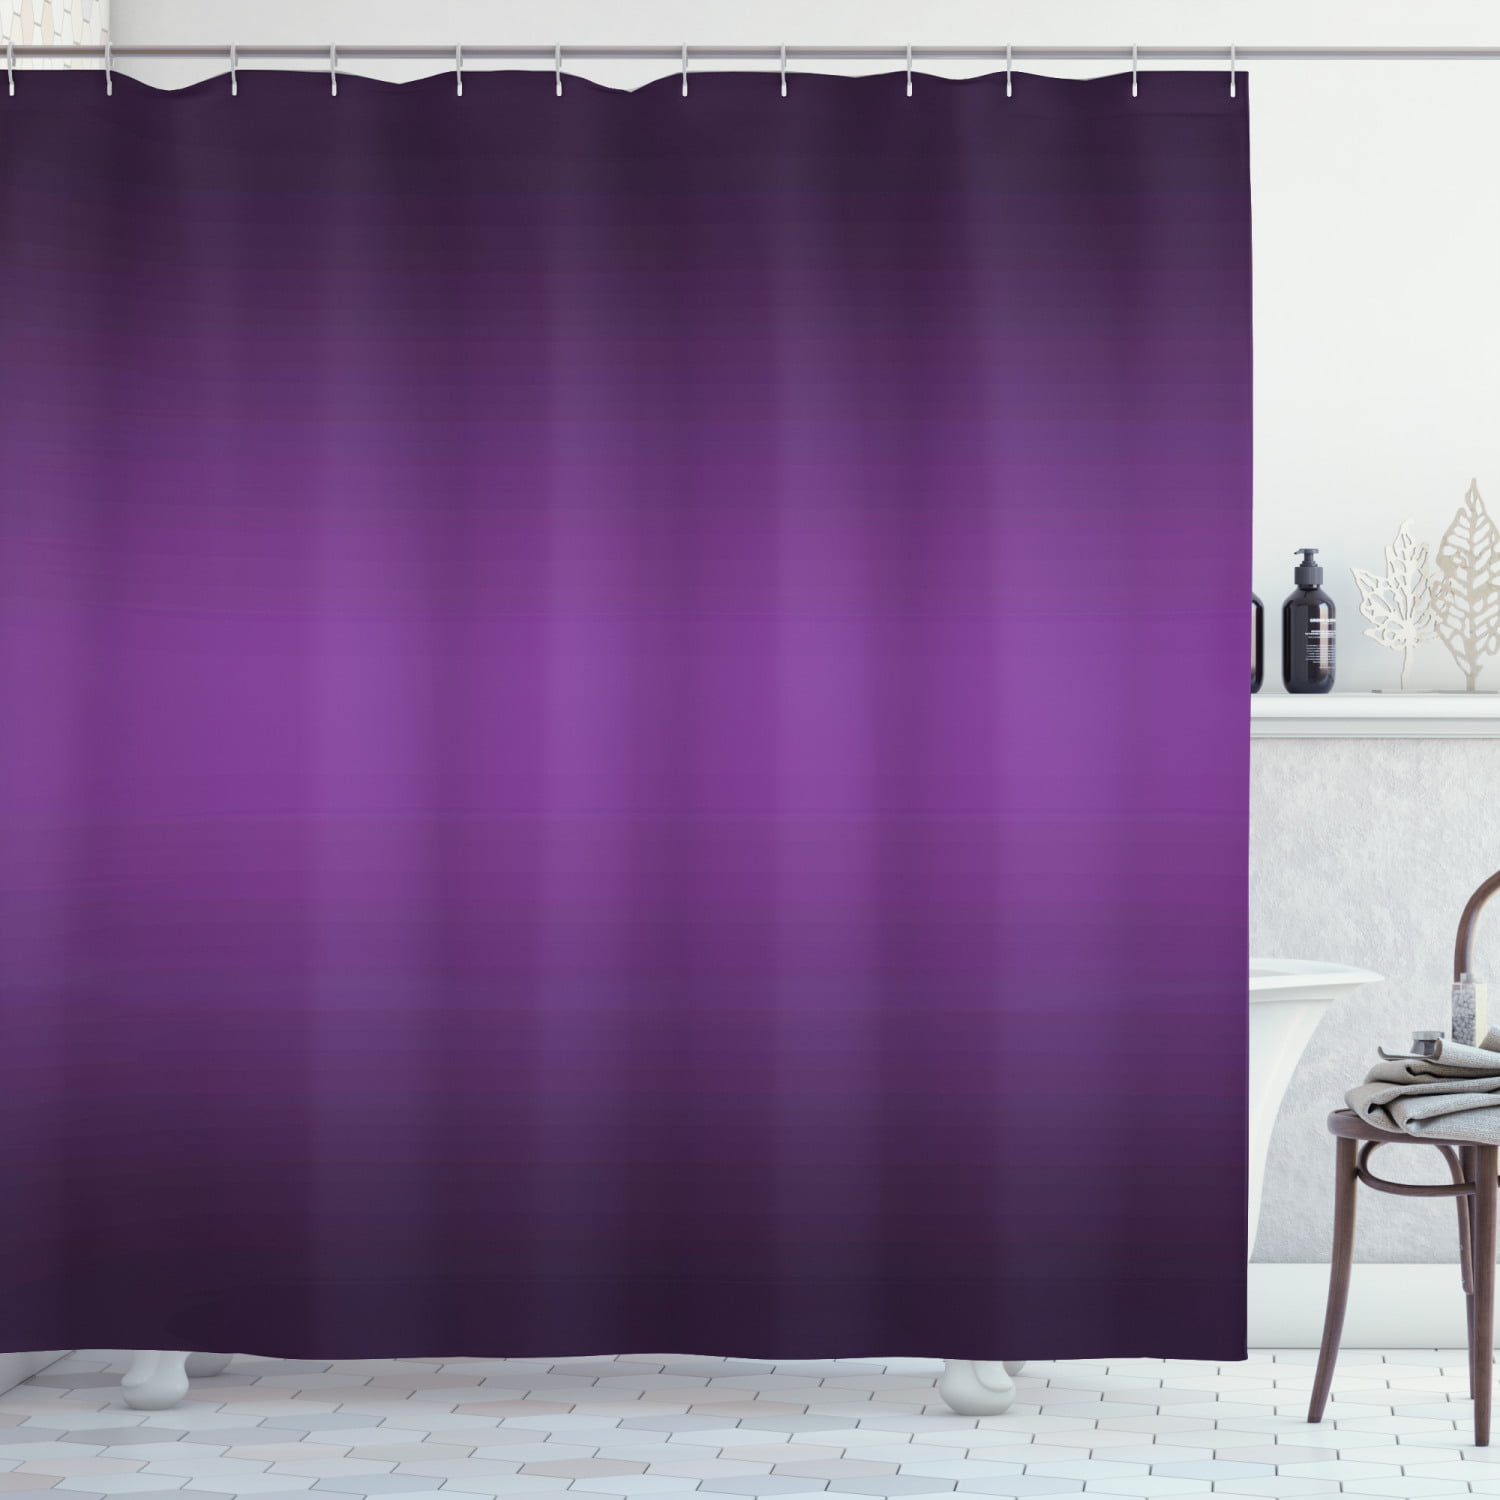 Ombre Shower Curtain Hollywood Glam, Ombre Shower Curtain Purple